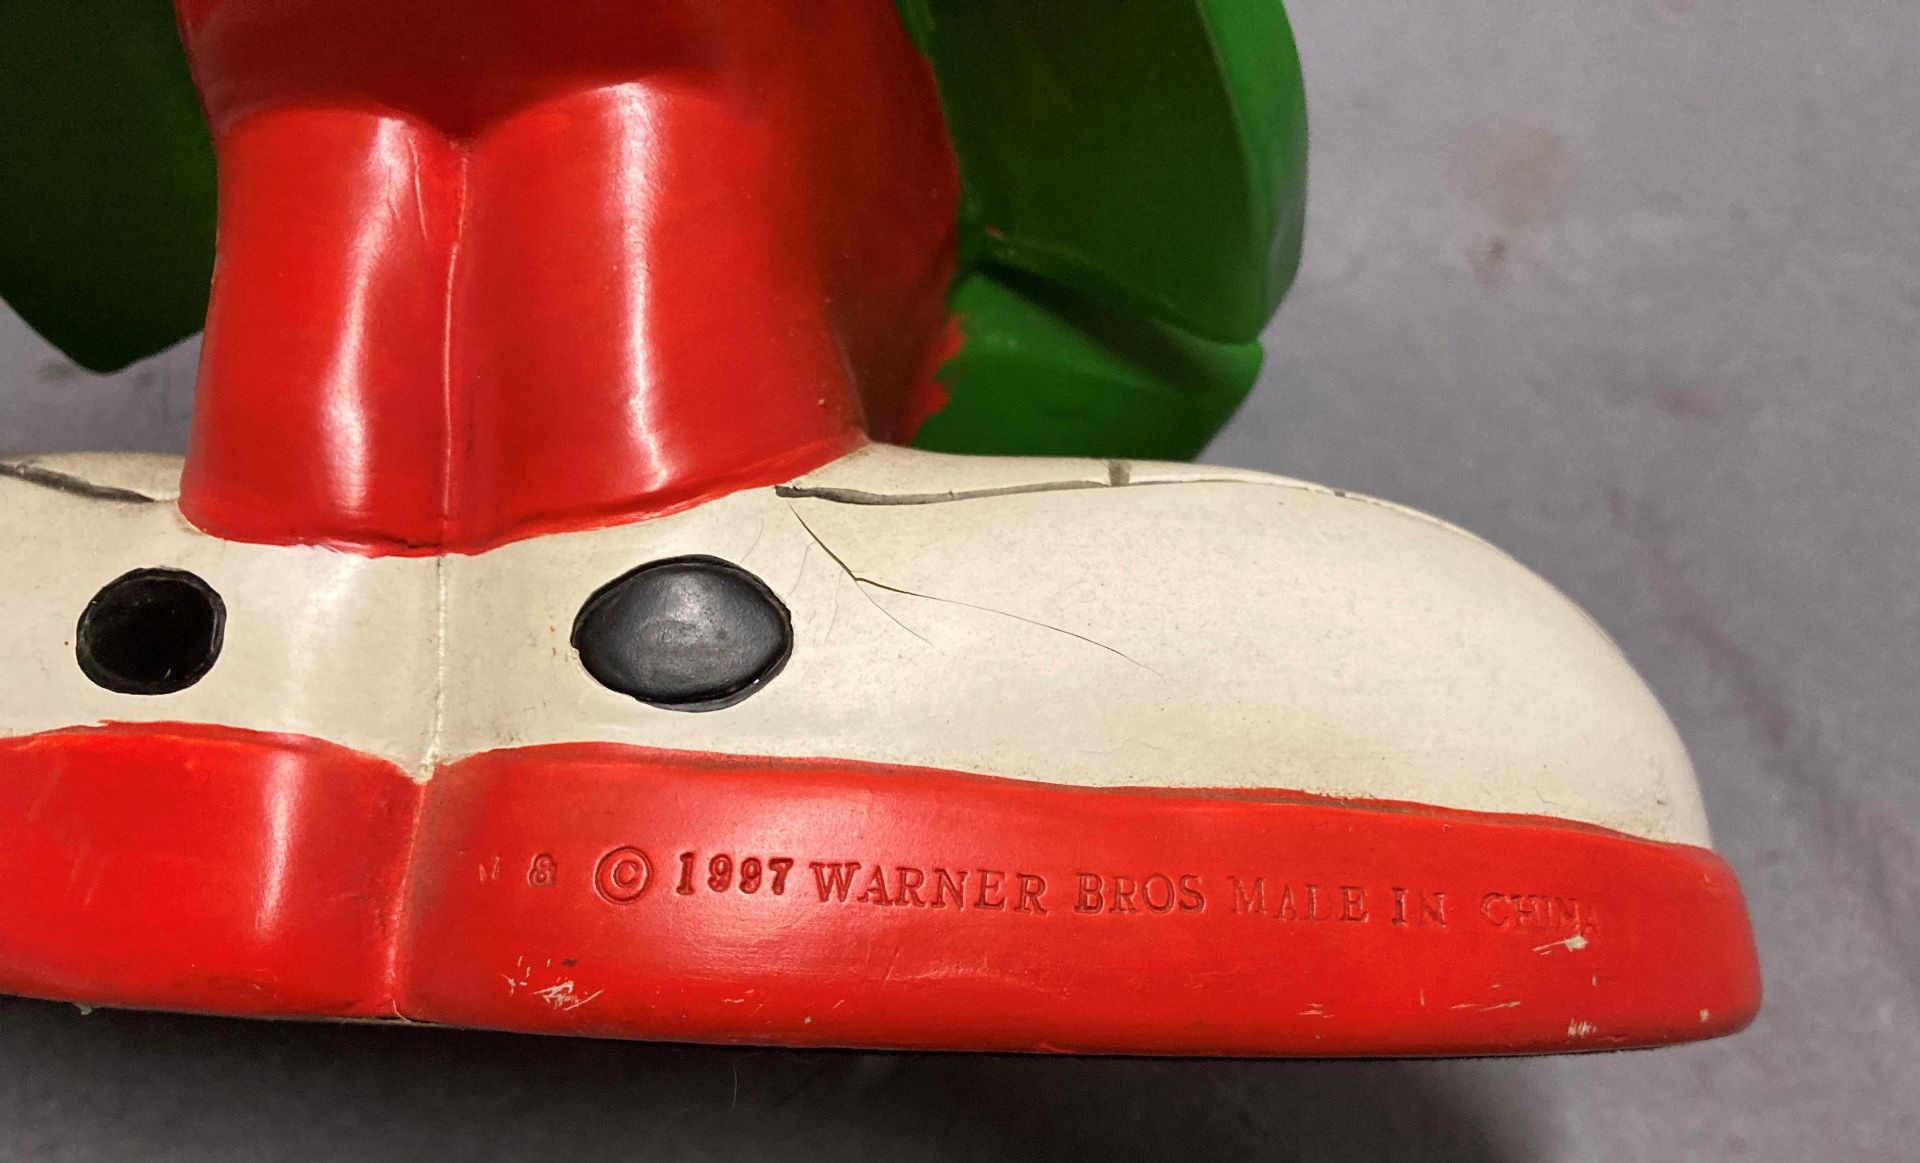 Warner Brothers model of Marvin the Martian, - Image 7 of 8